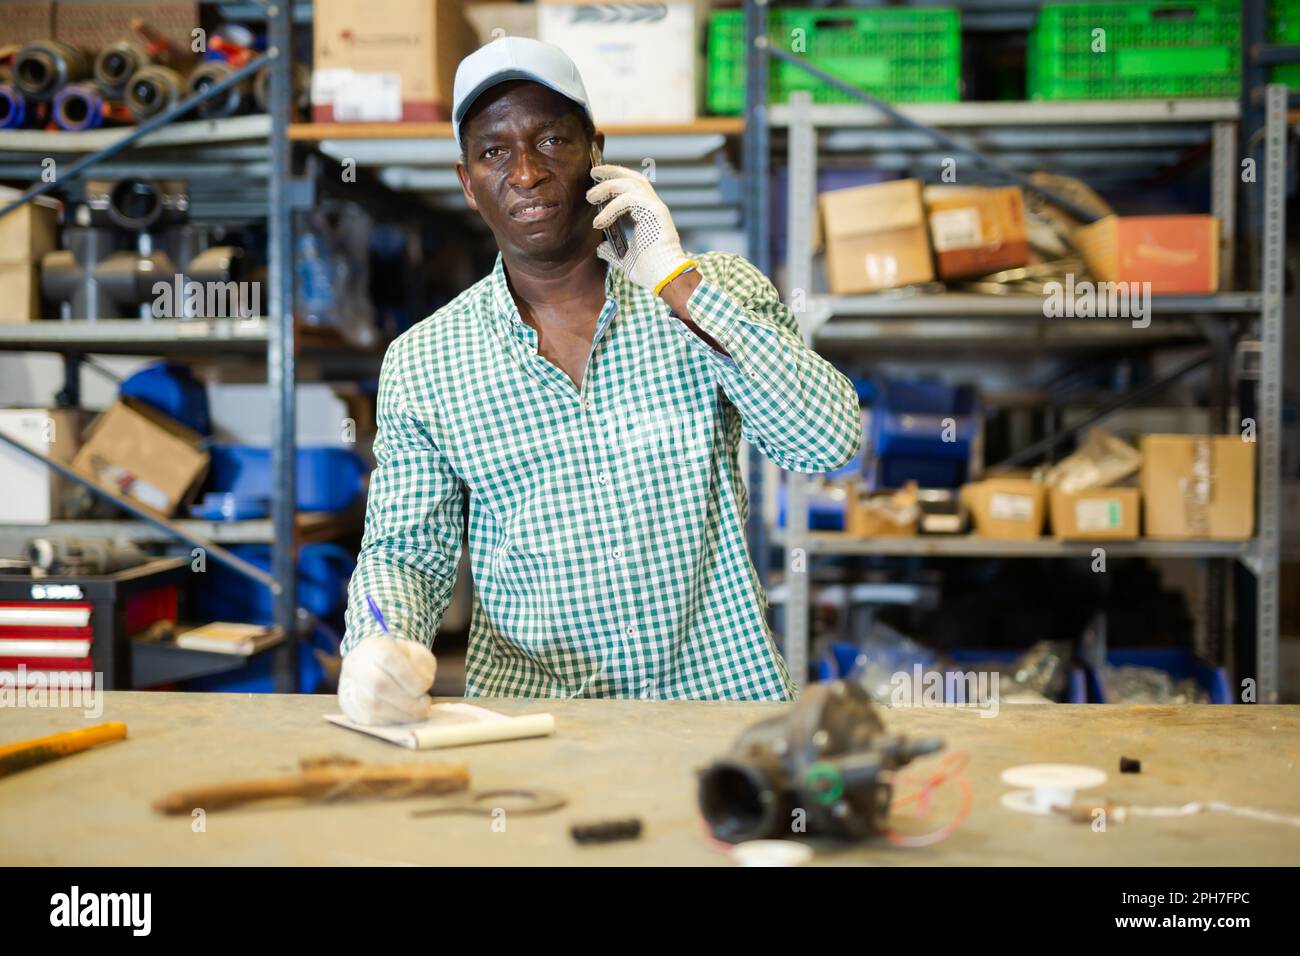 Portrait of African American man confirming order from customer Stock Photo